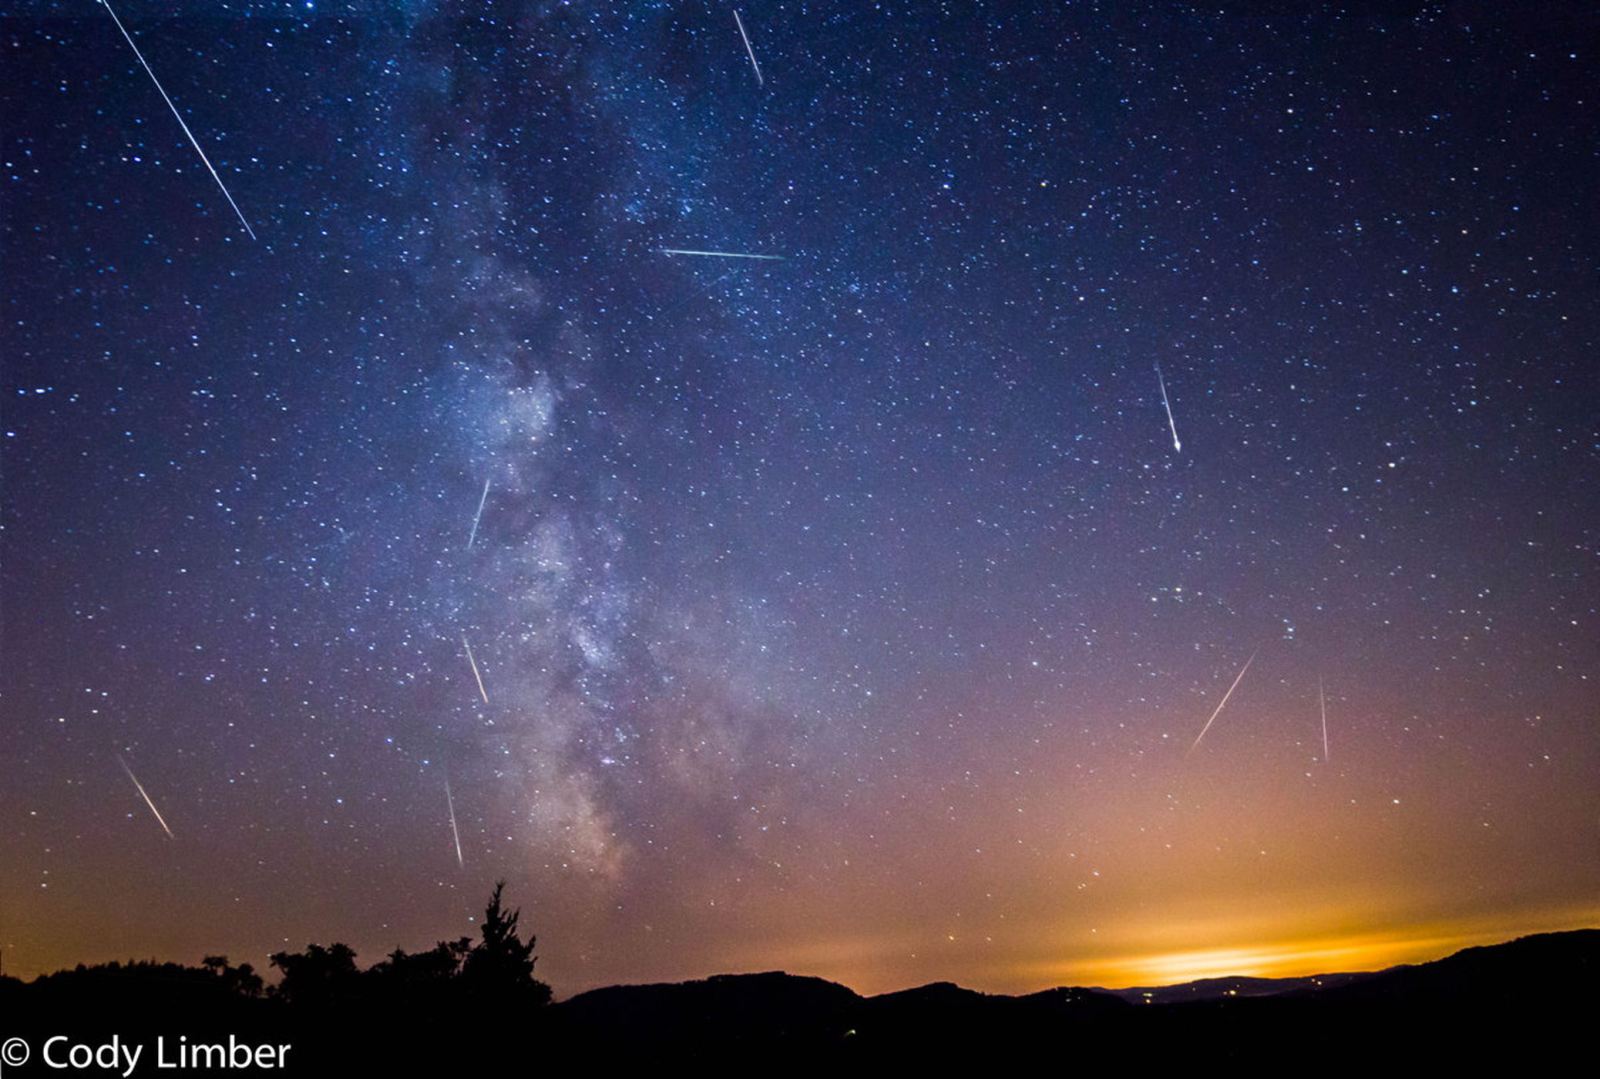 Hanoians eager to see Perseid meteor shower early Friday morning